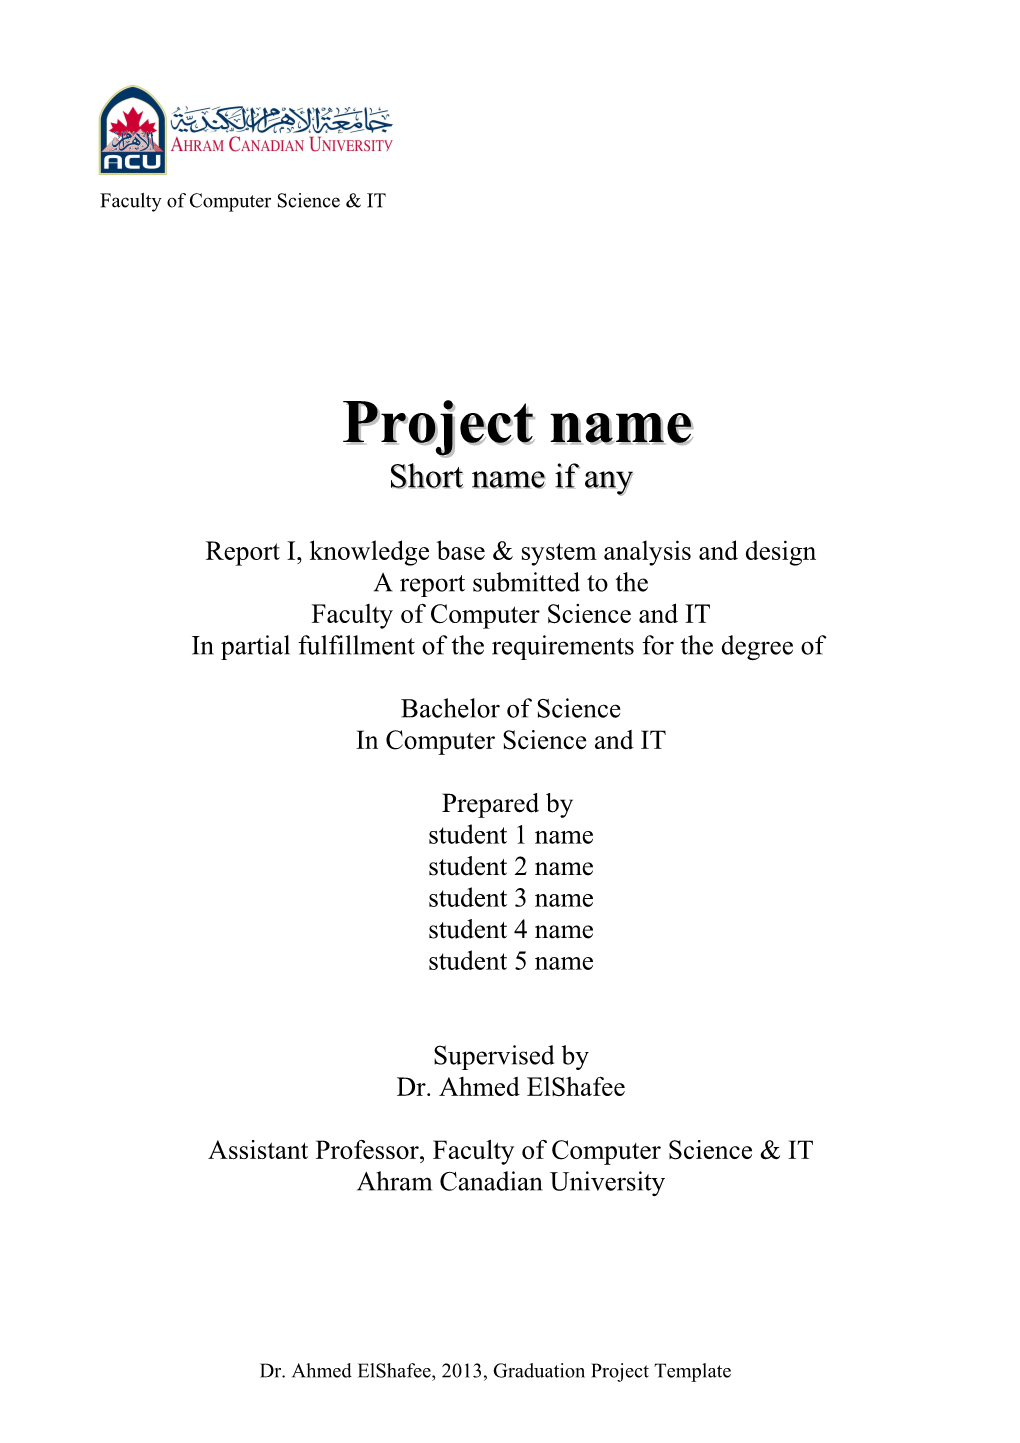 Report I, Knowledge Base & System Analysis and Design